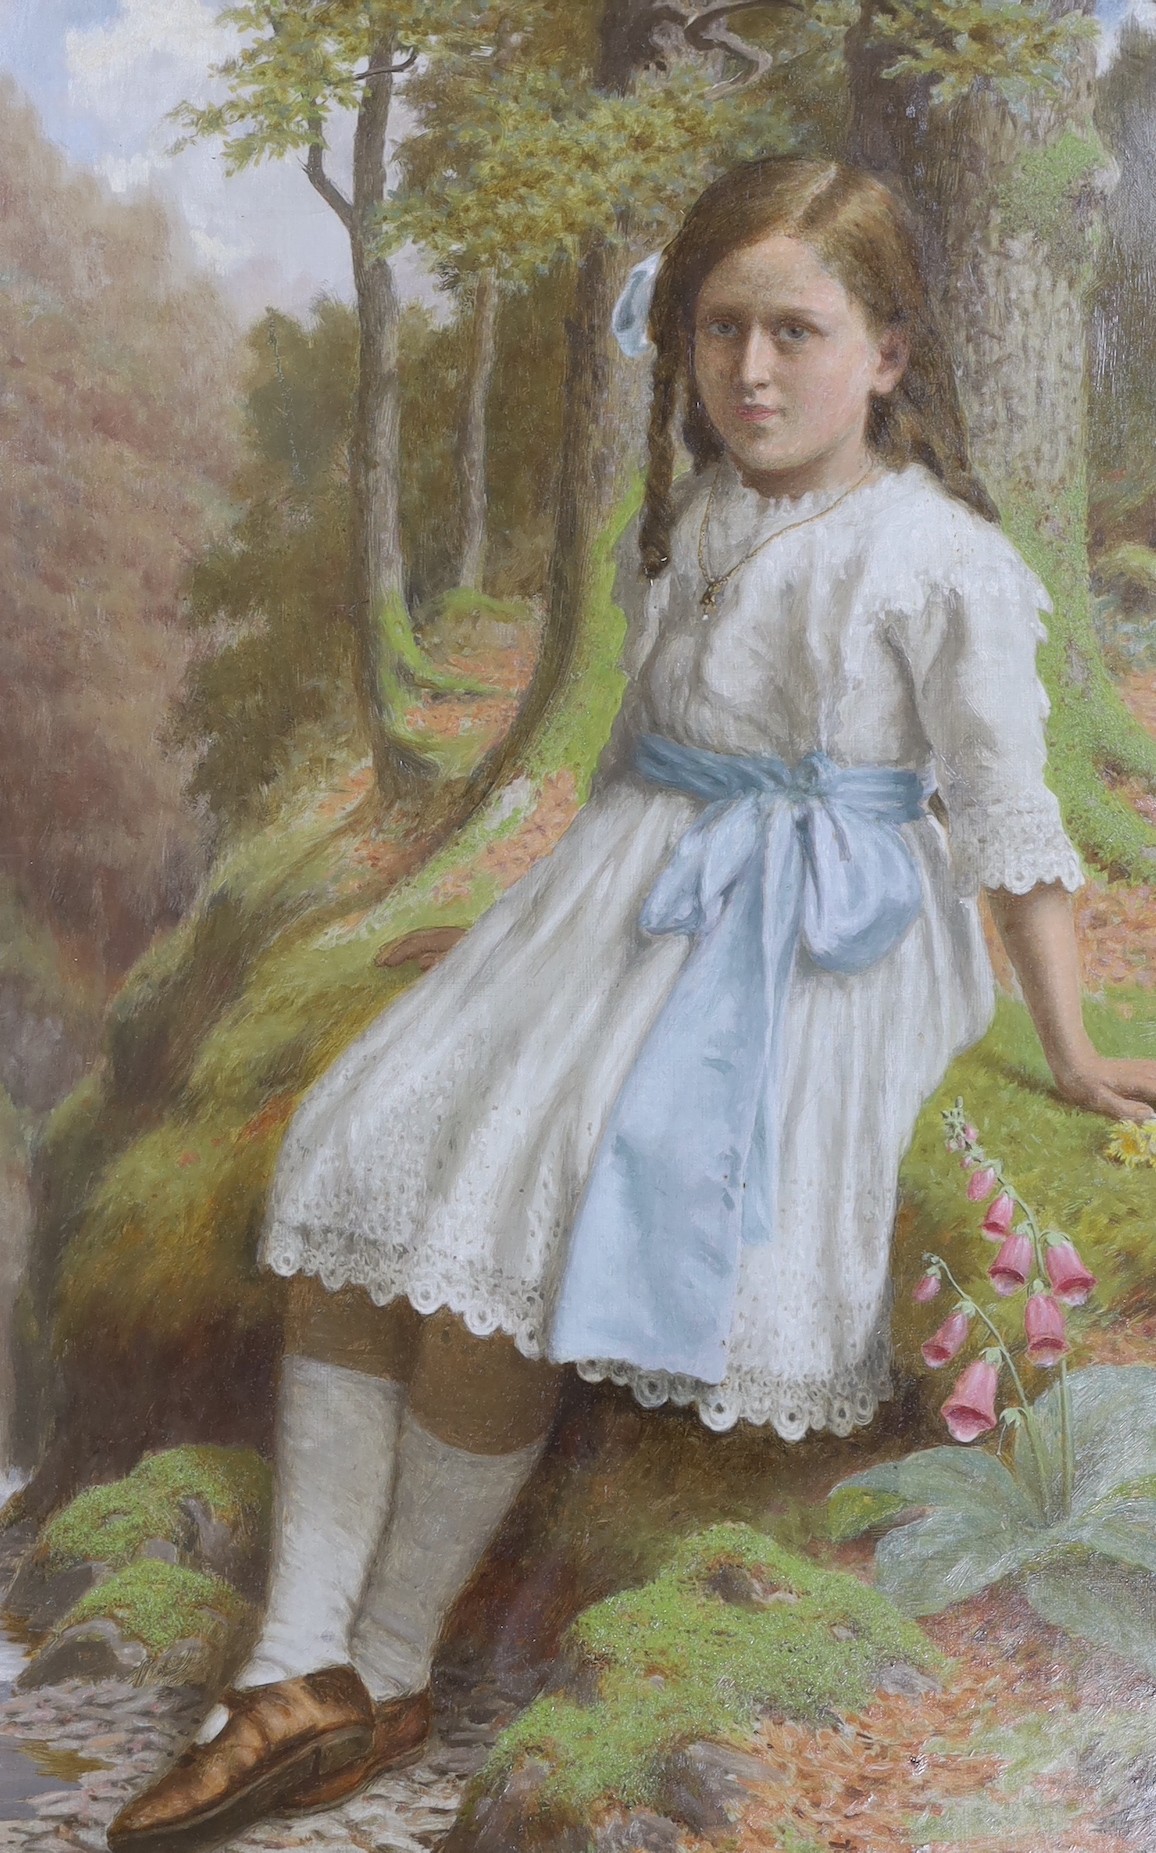 James Barnes (1870-1923), oil on canvas, Girl seated in woodland, 80 x 54cm